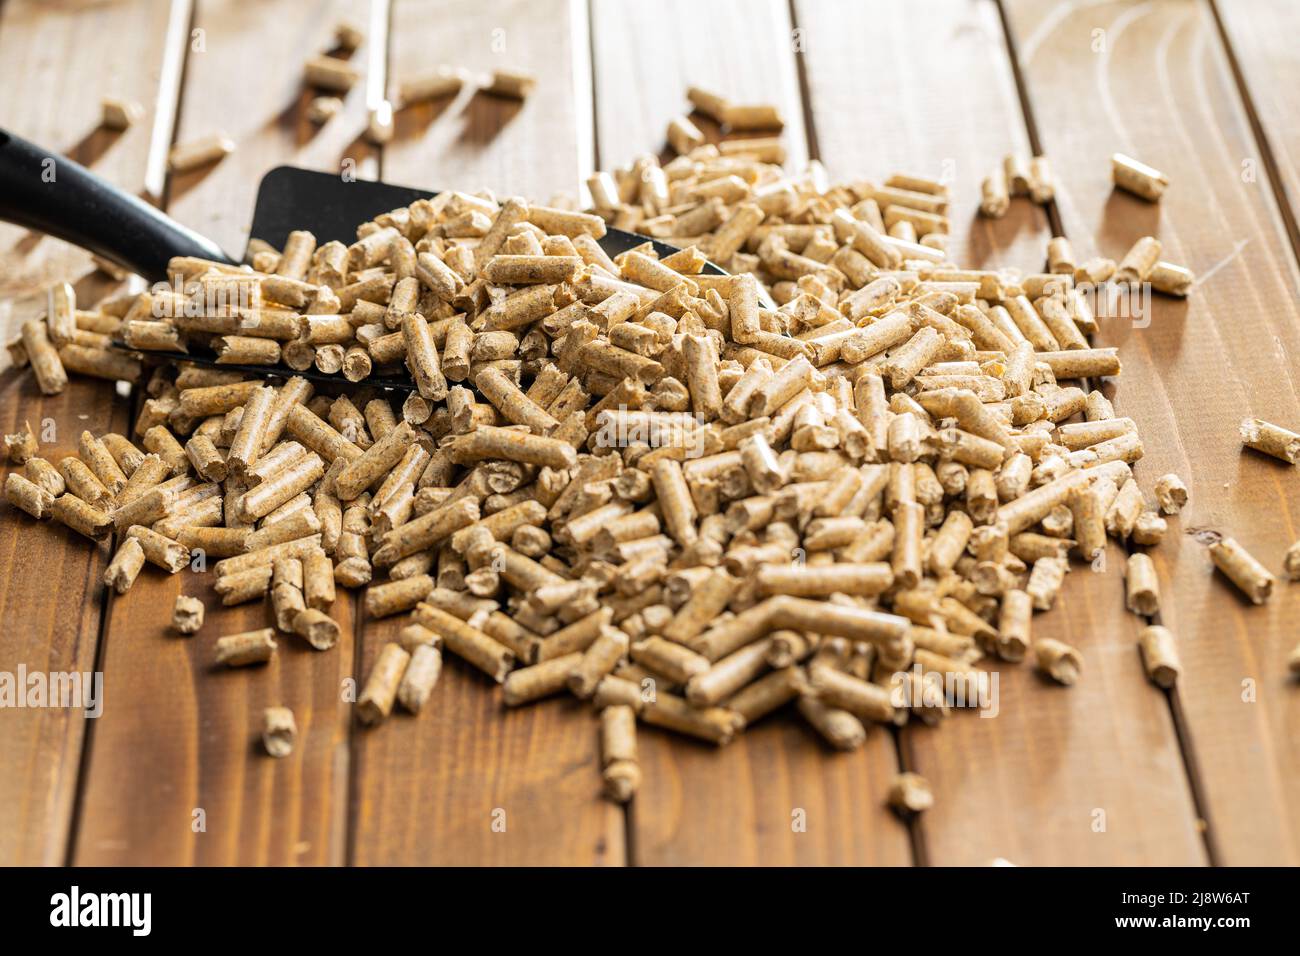 Wooden pellets, biofuel on wooden table. Ecologic fuel made from biomass. Renewable energy source on wooden table. Stock Photo